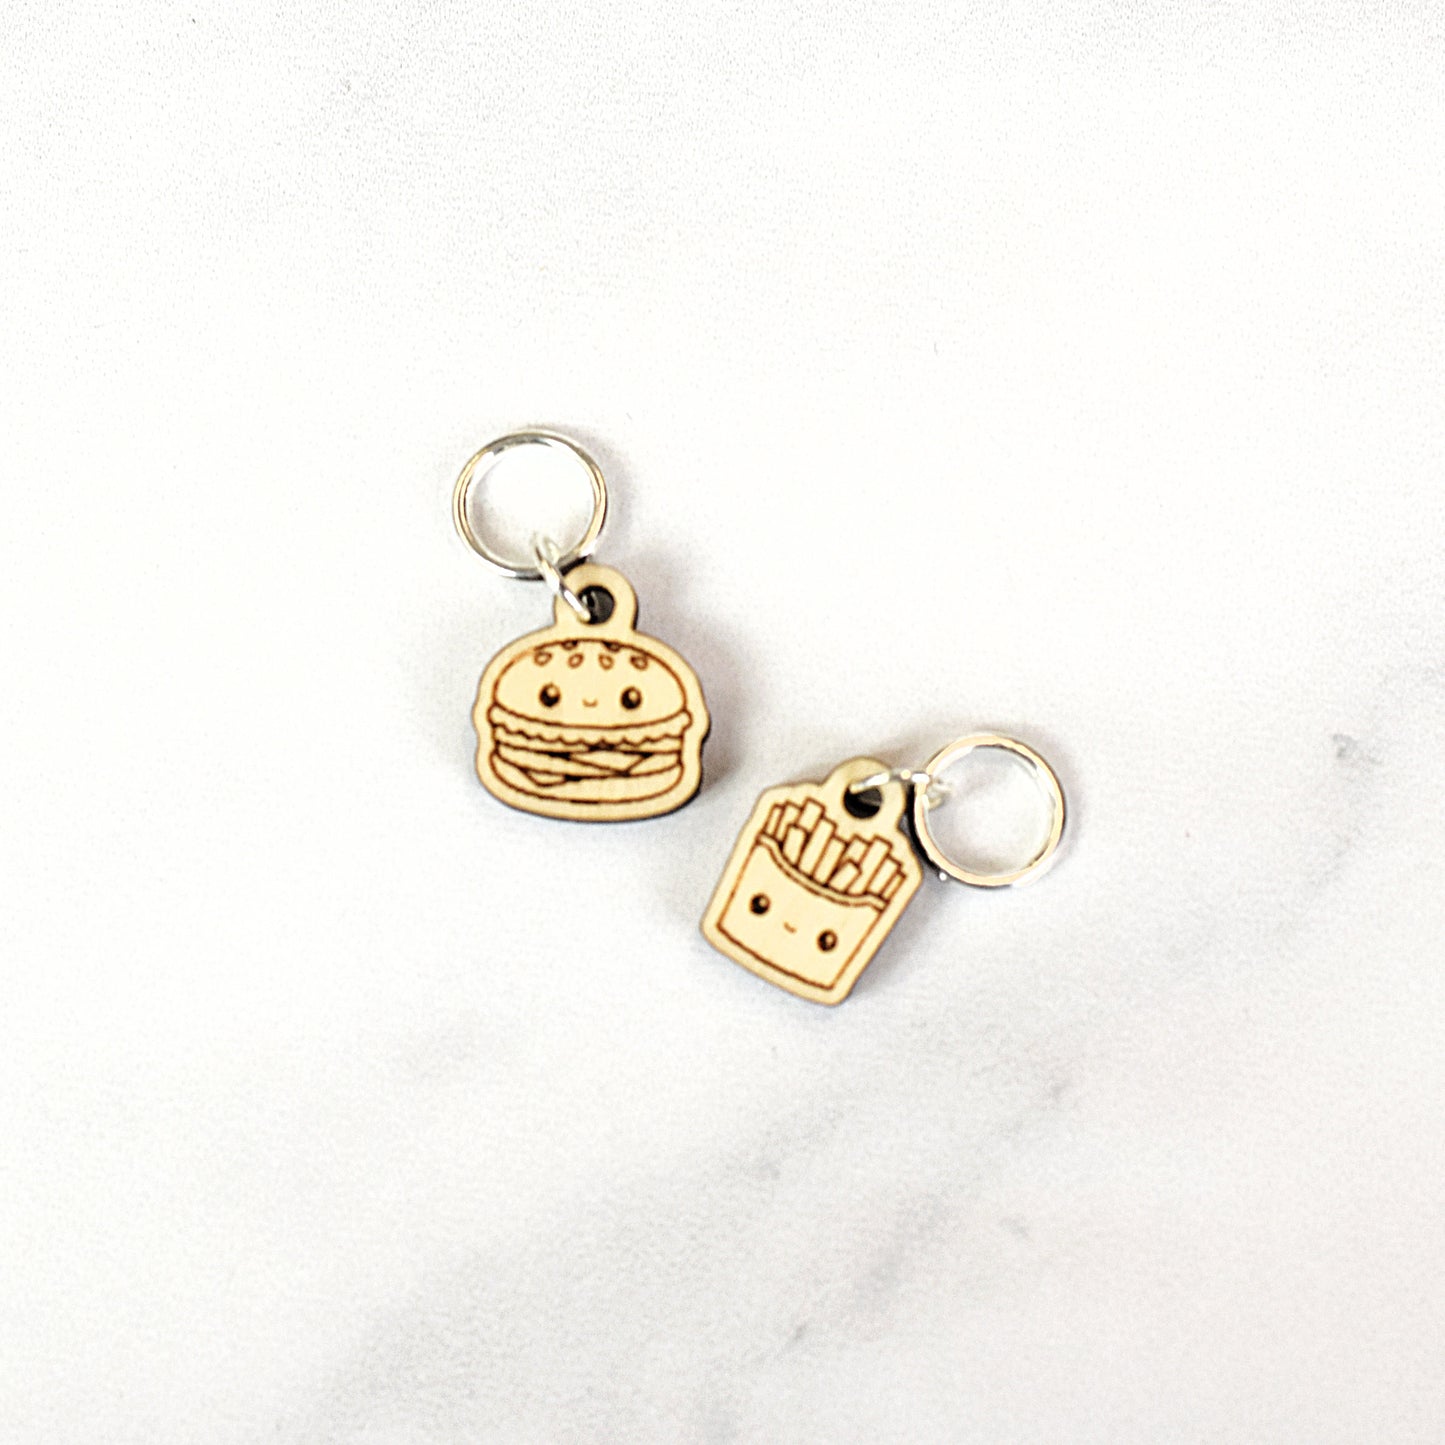 Set of 2 Laser Engraved Stitch Markers - Kawaii Burger and Fries